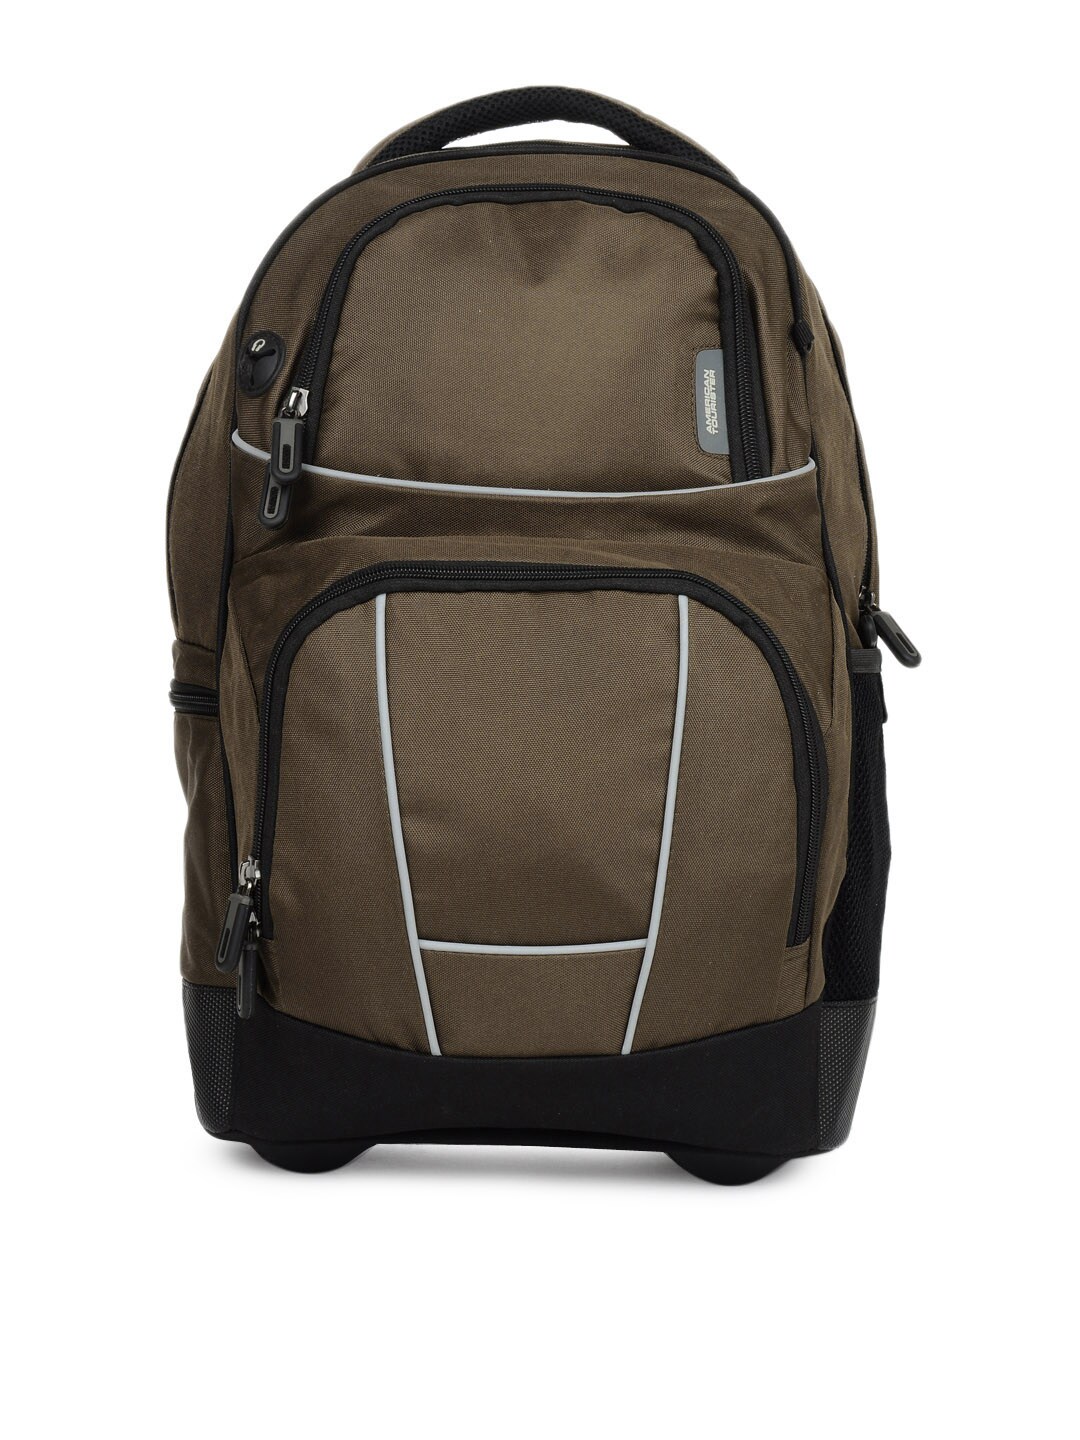 American Tourister Unisex Brown Wanderer Backpack